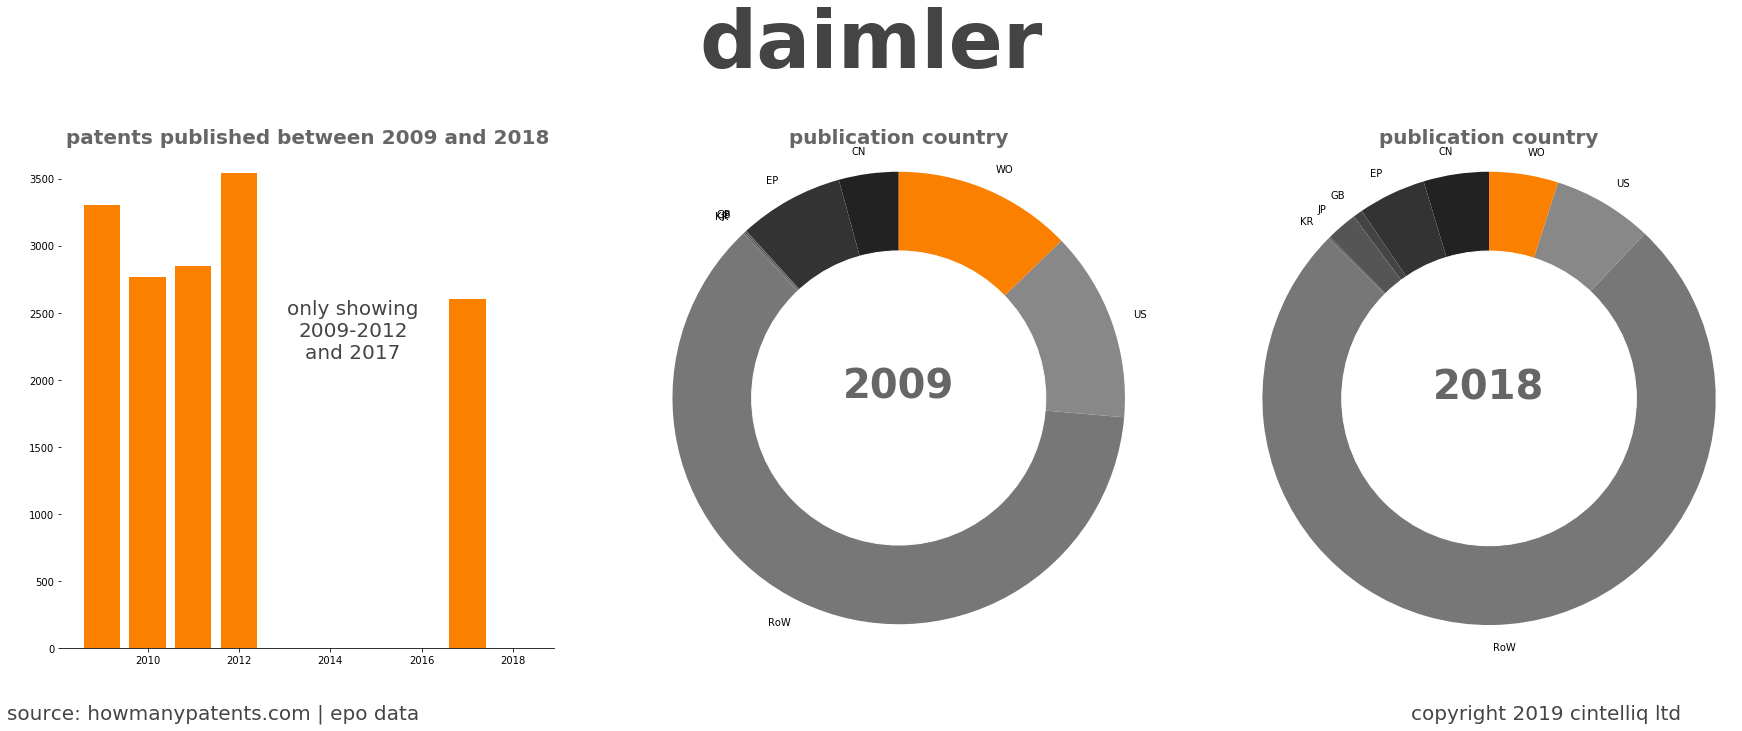 summary of patents for Daimler